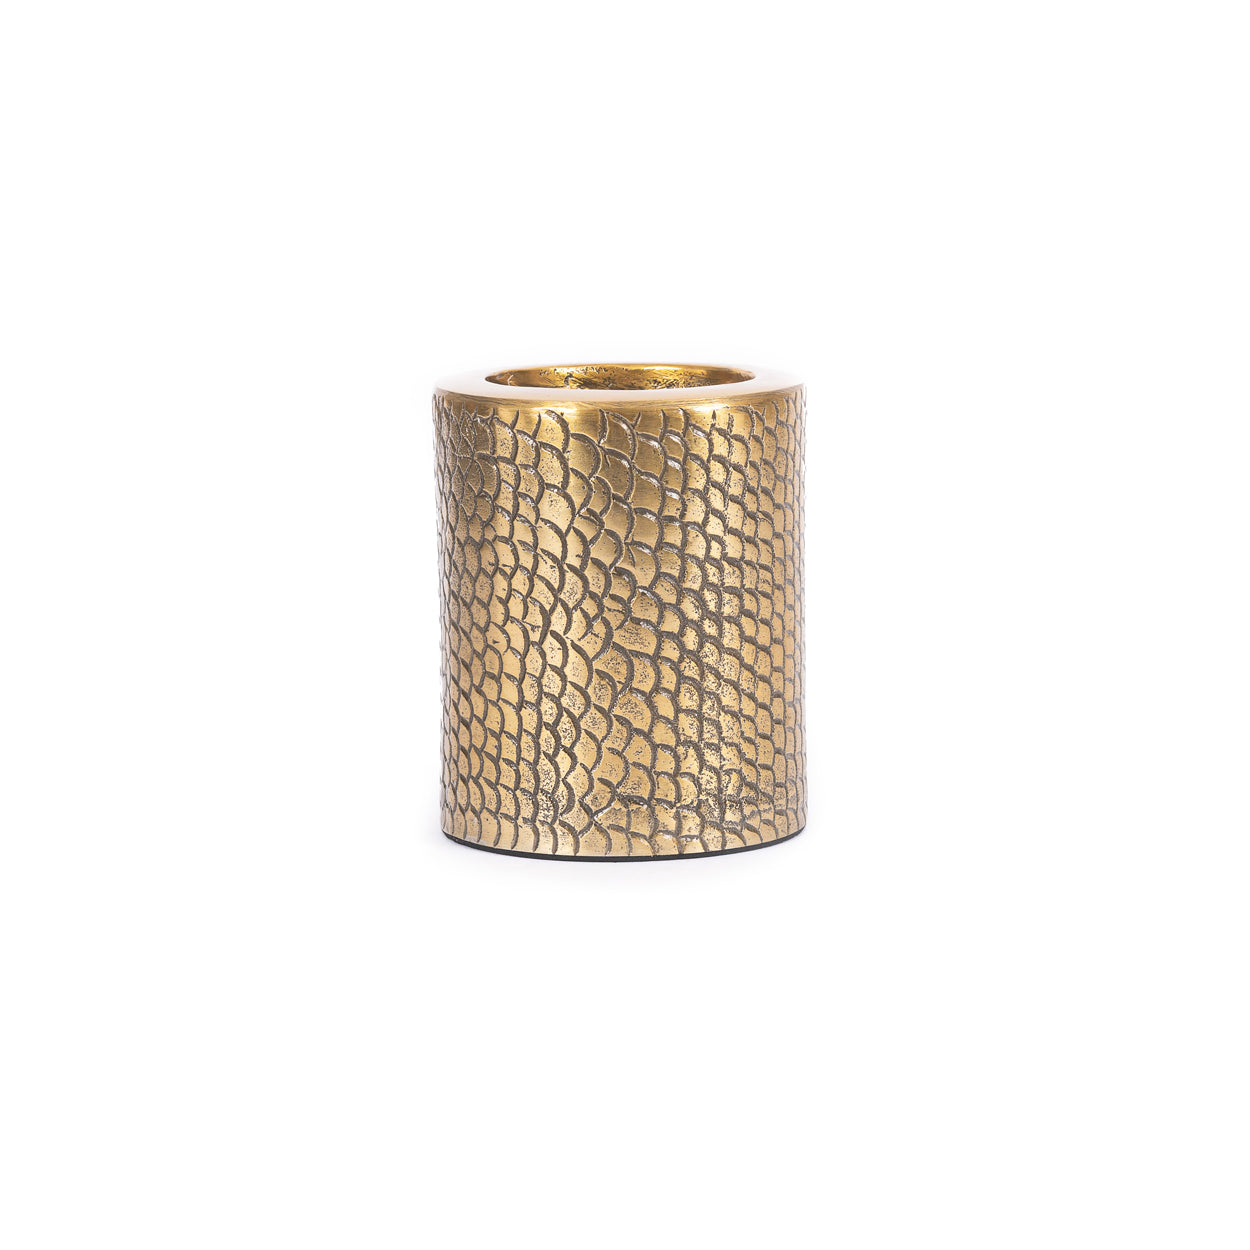 THE CROCO Candle Holder large without candle